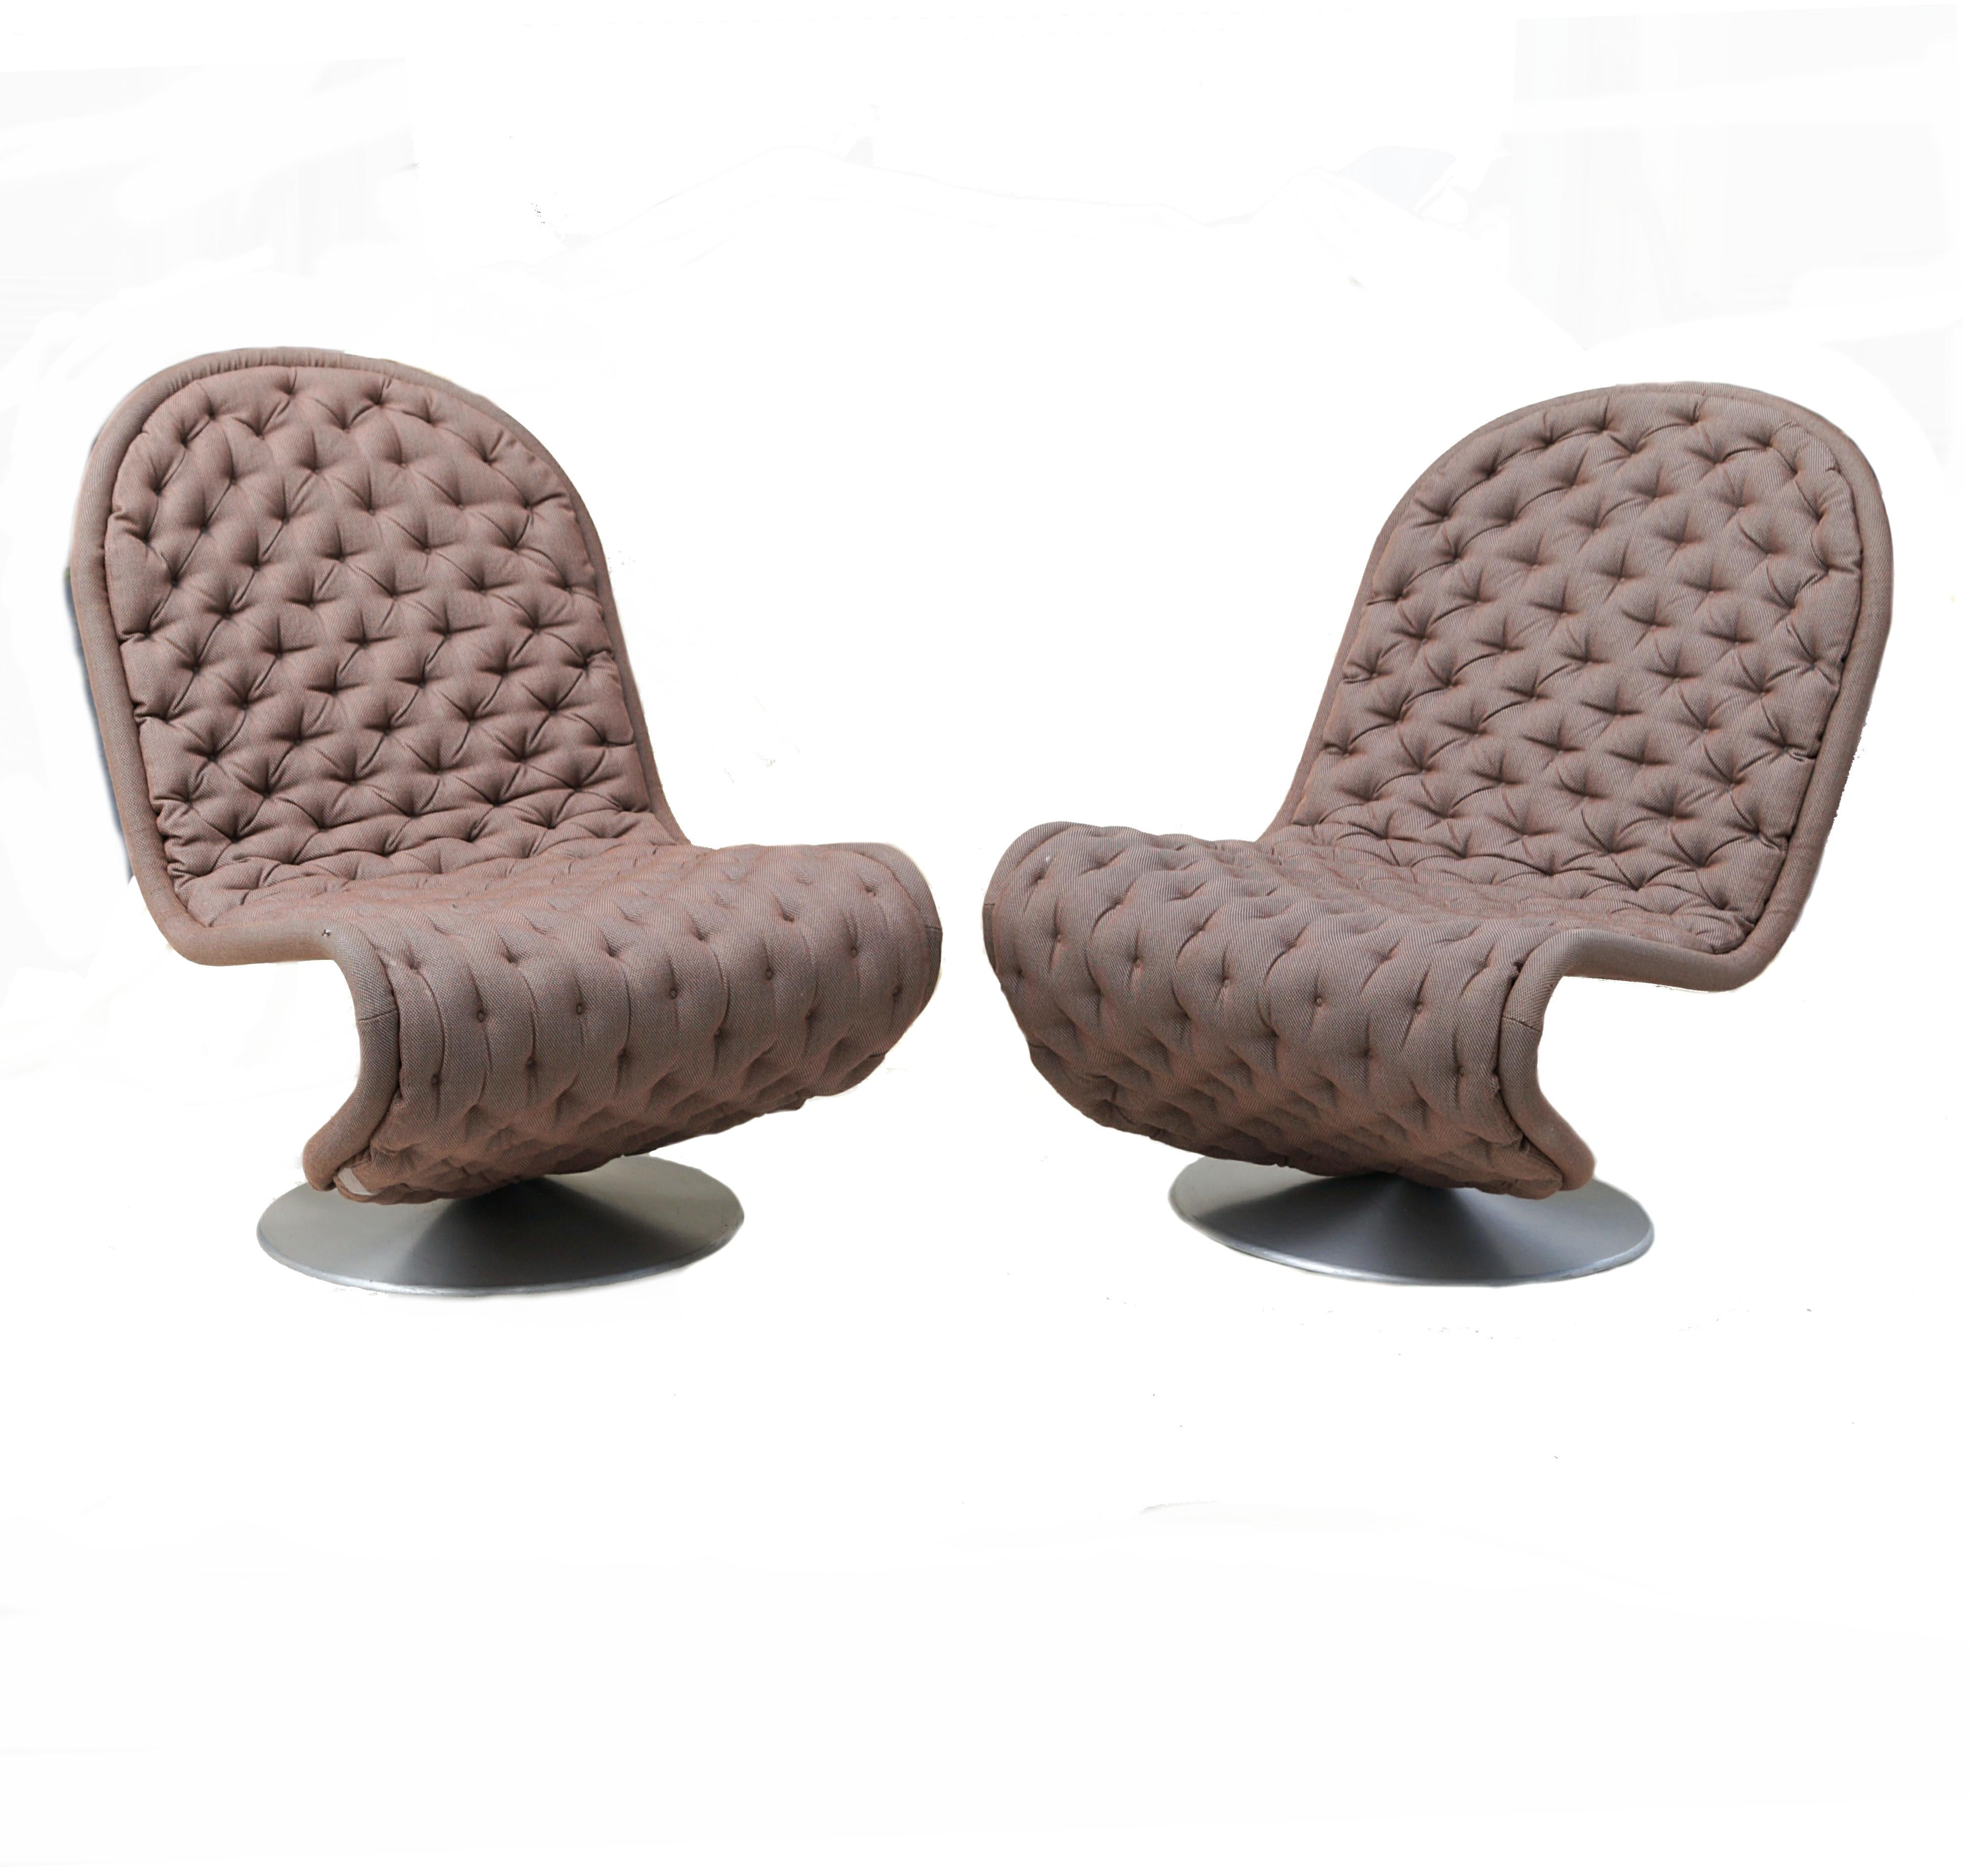 Pair of Verner Panton tufted 123 lounge chairs. Marked Verner Panton. If you are in the New Jersey , New York City Metro Area , please contact us with your delivery zip code, as we may be able to deliver curbside for less than the calculated White